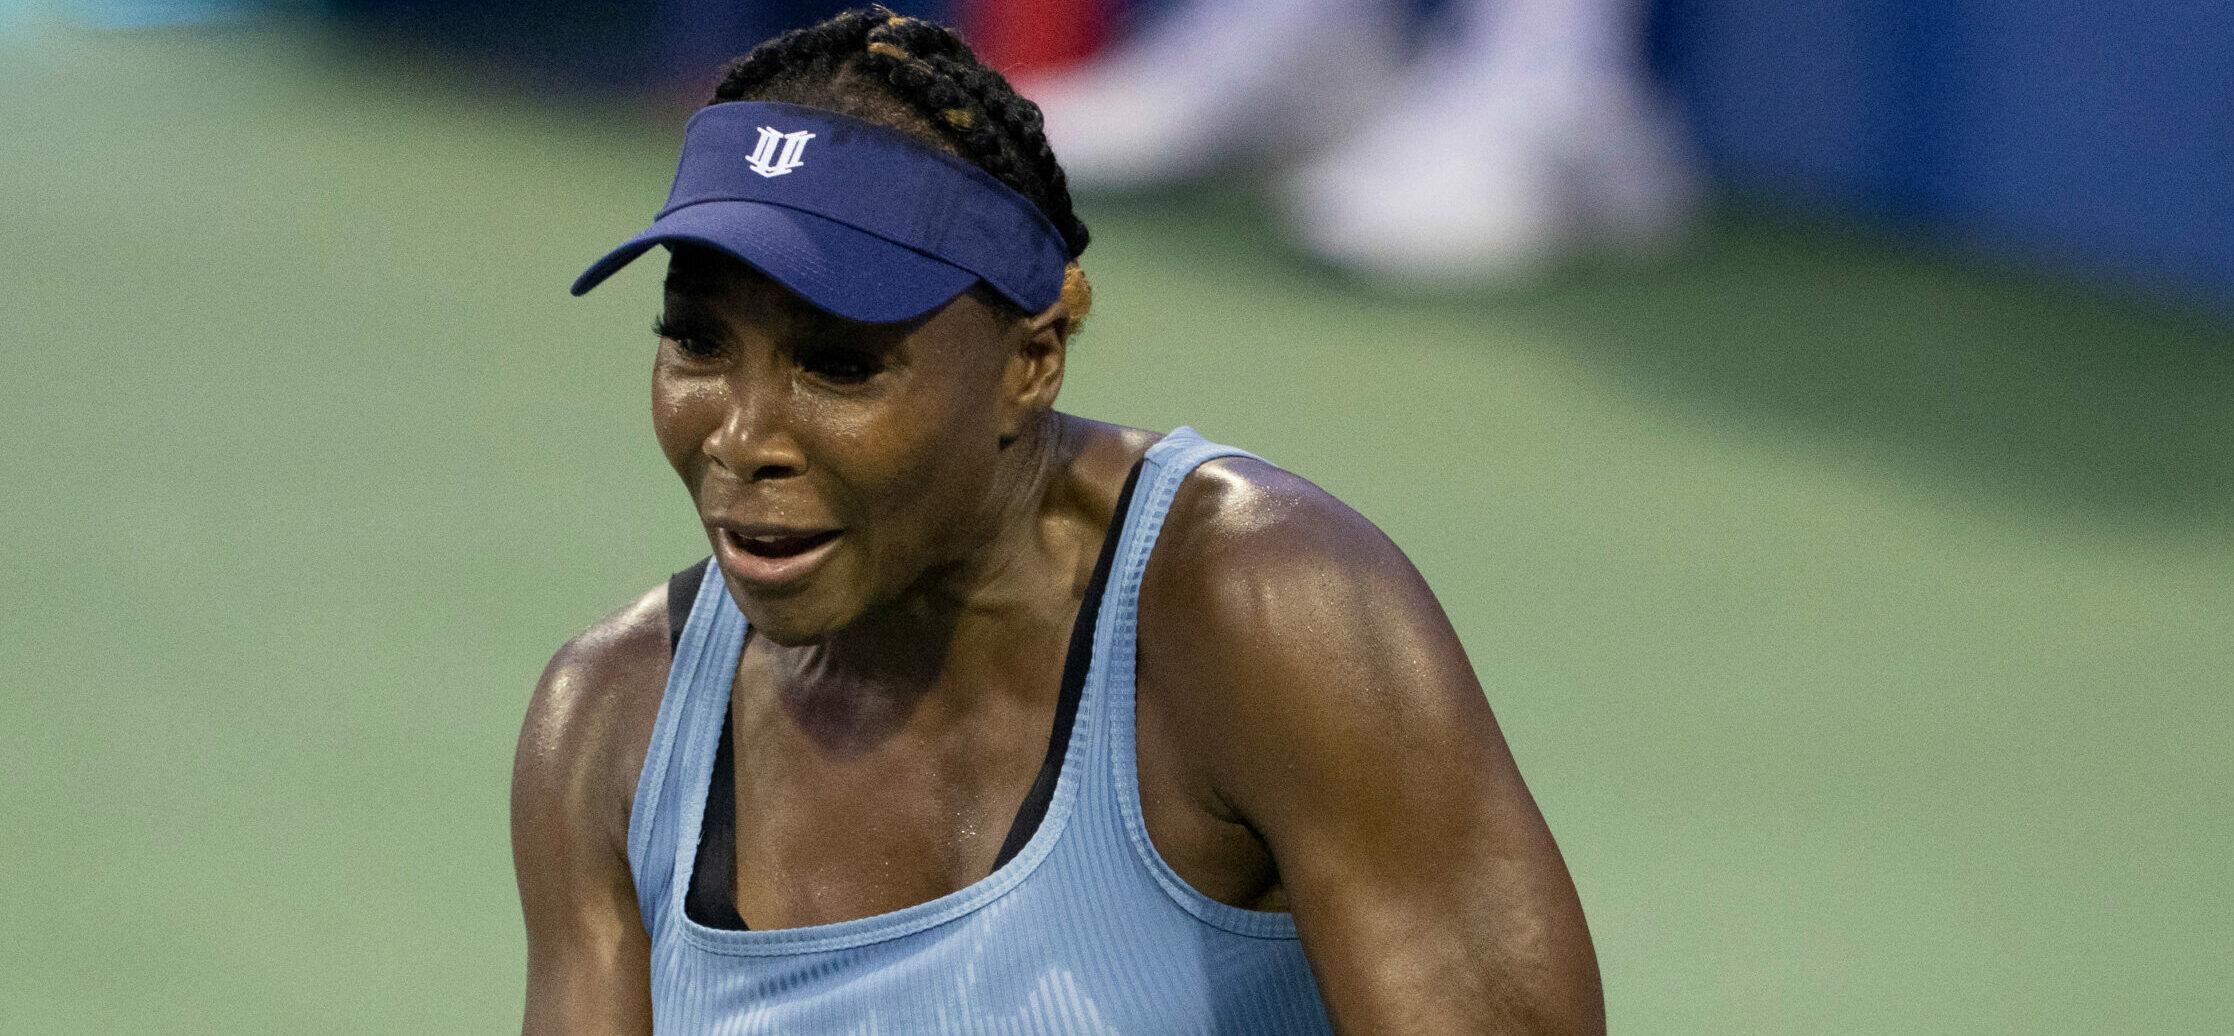 Venus Williams Shares 11 Principles To Live By With Fans